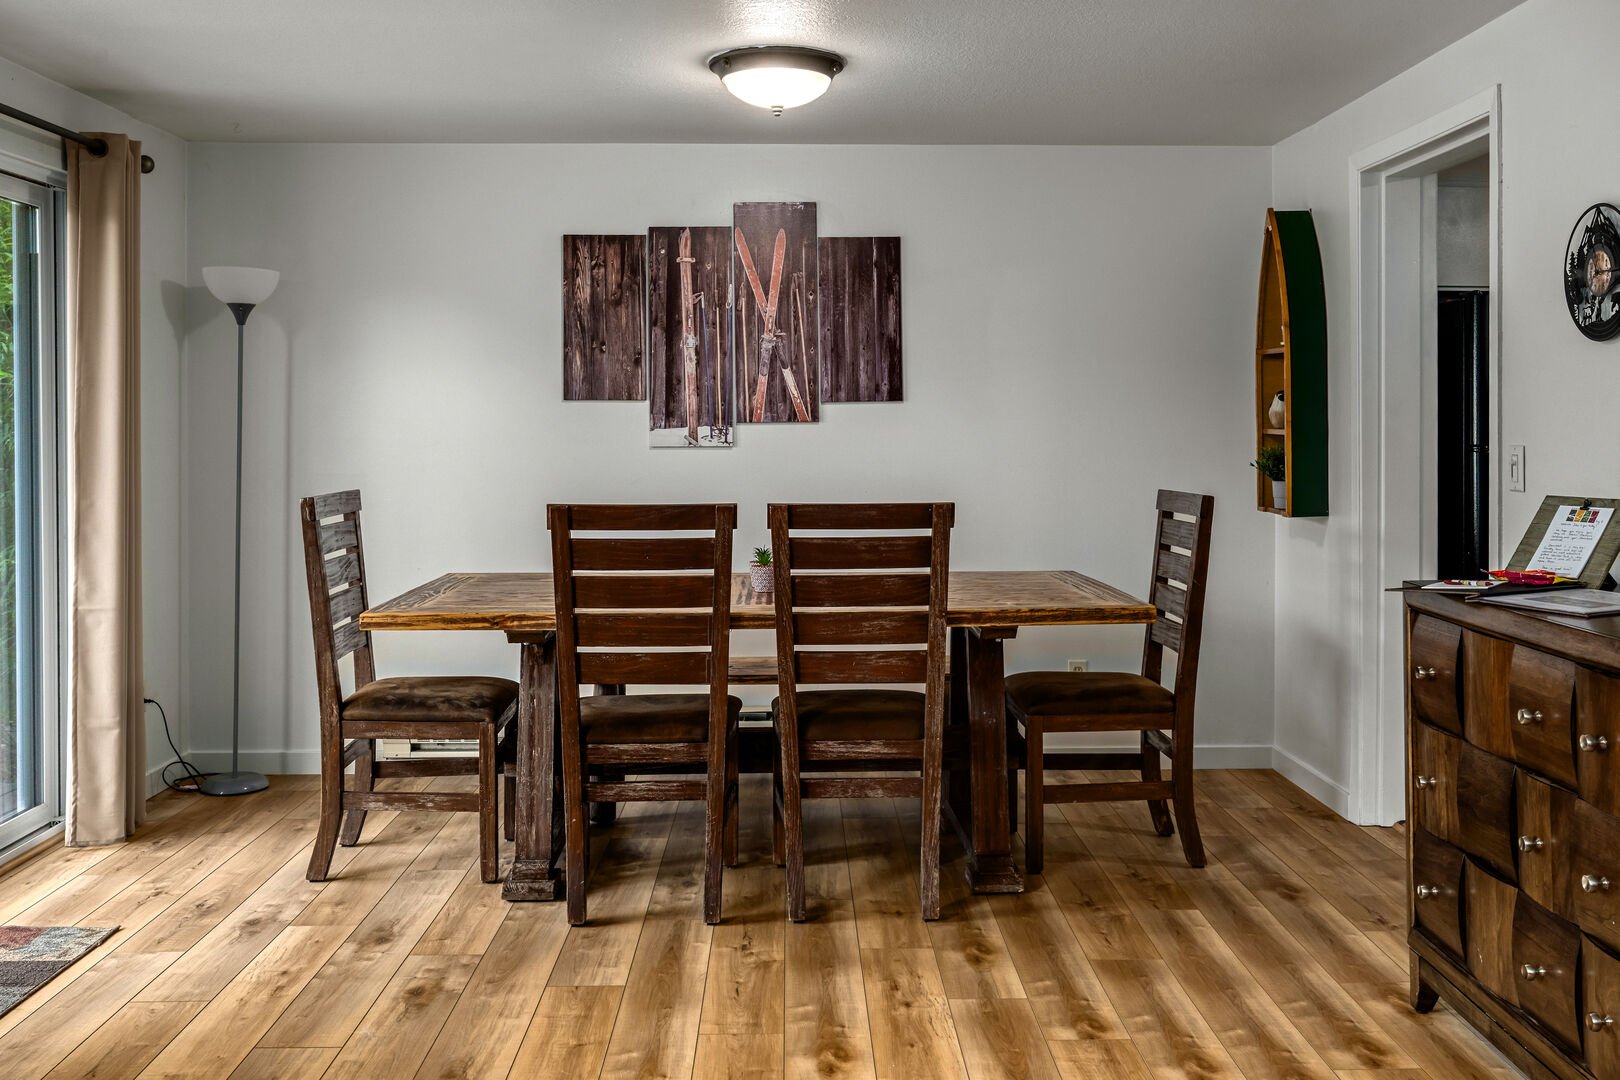 Dining Room Table with Seating for 7 with the bench along the back wall!